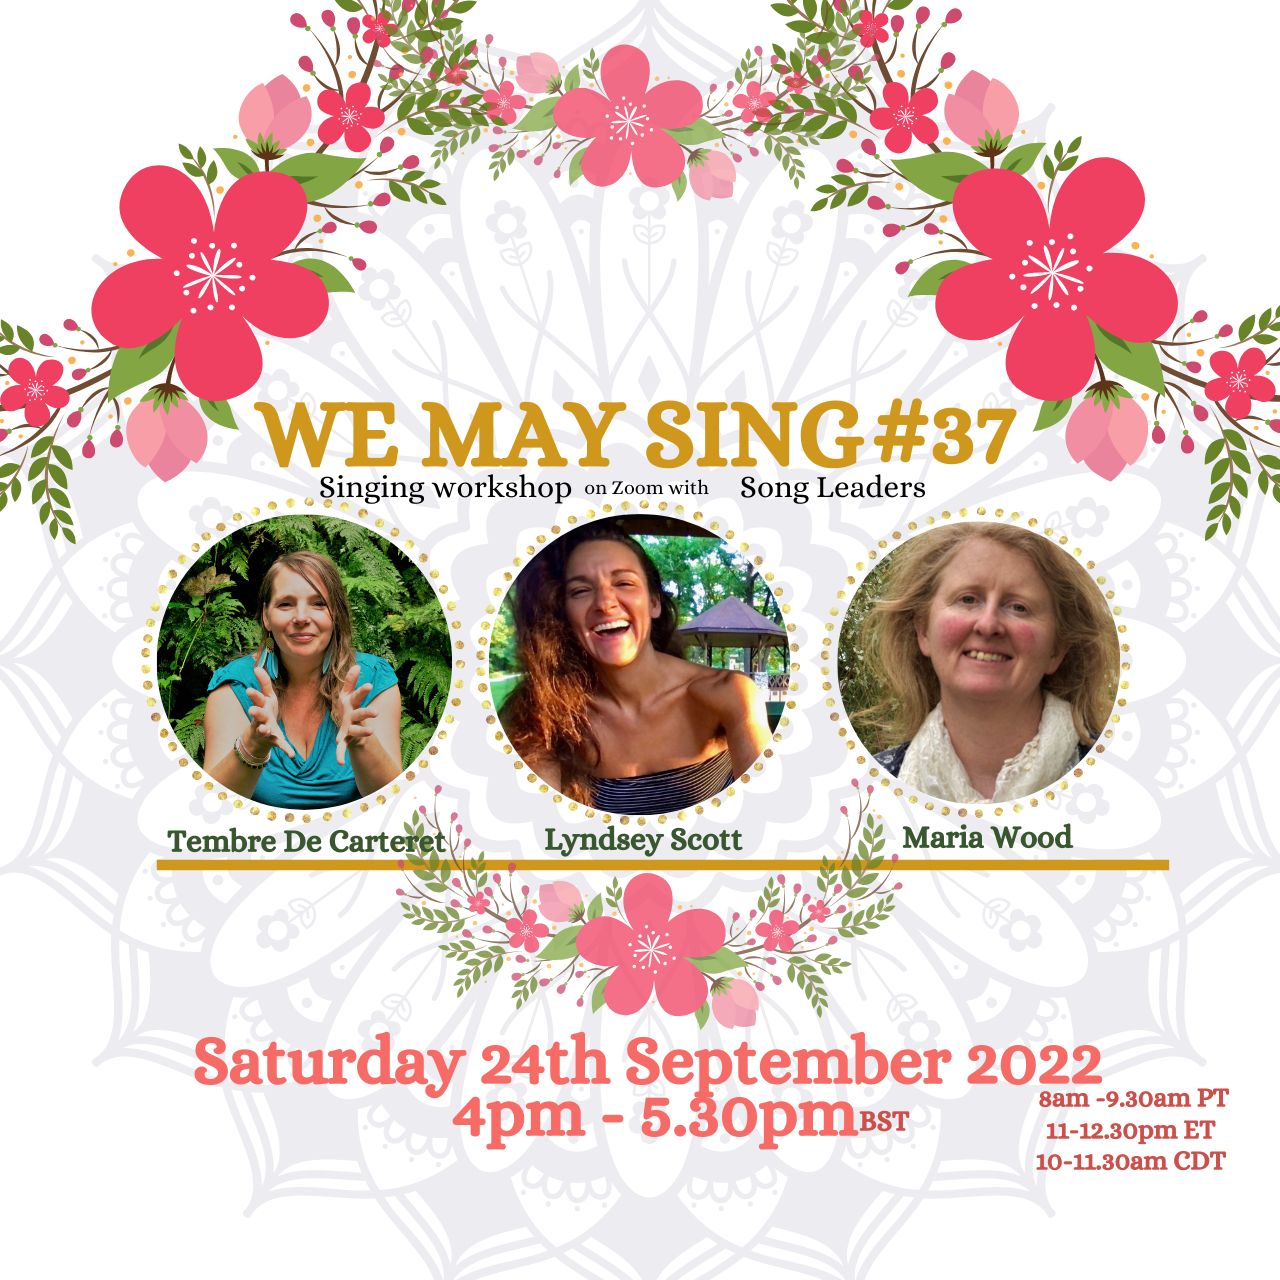 We May Sing #37 with Tembre, Lyndsey & Maria. Thank you for registering to join us. Sliding sclare donation €10-25 per singer is required. Send to www.paypal.me/tembresinging or visit www.tembresong.com   